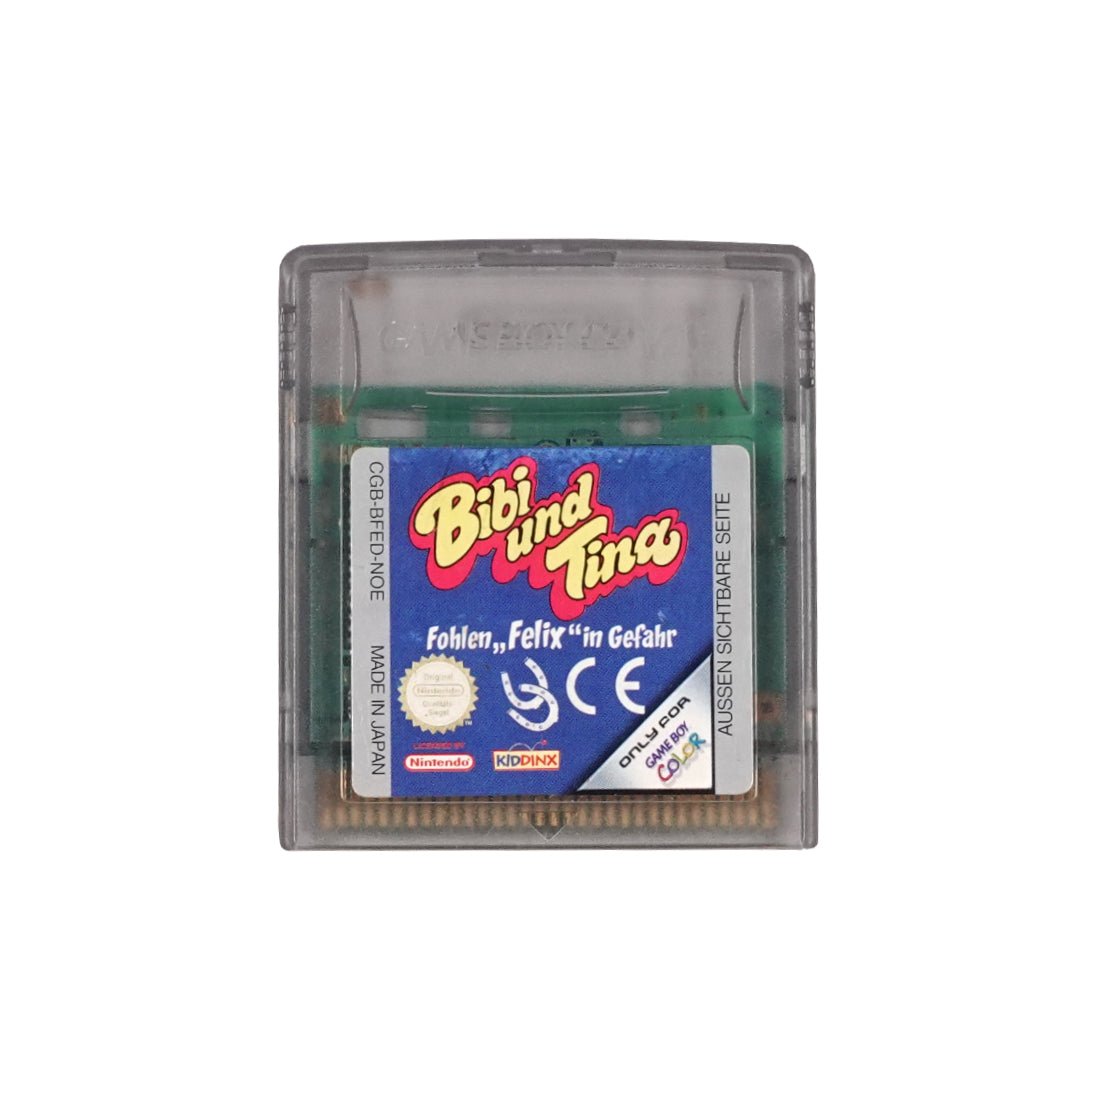 (Pre-Owned) Bibi und Tina: German Edition - Gameboy Classic - Store 974 | ستور ٩٧٤